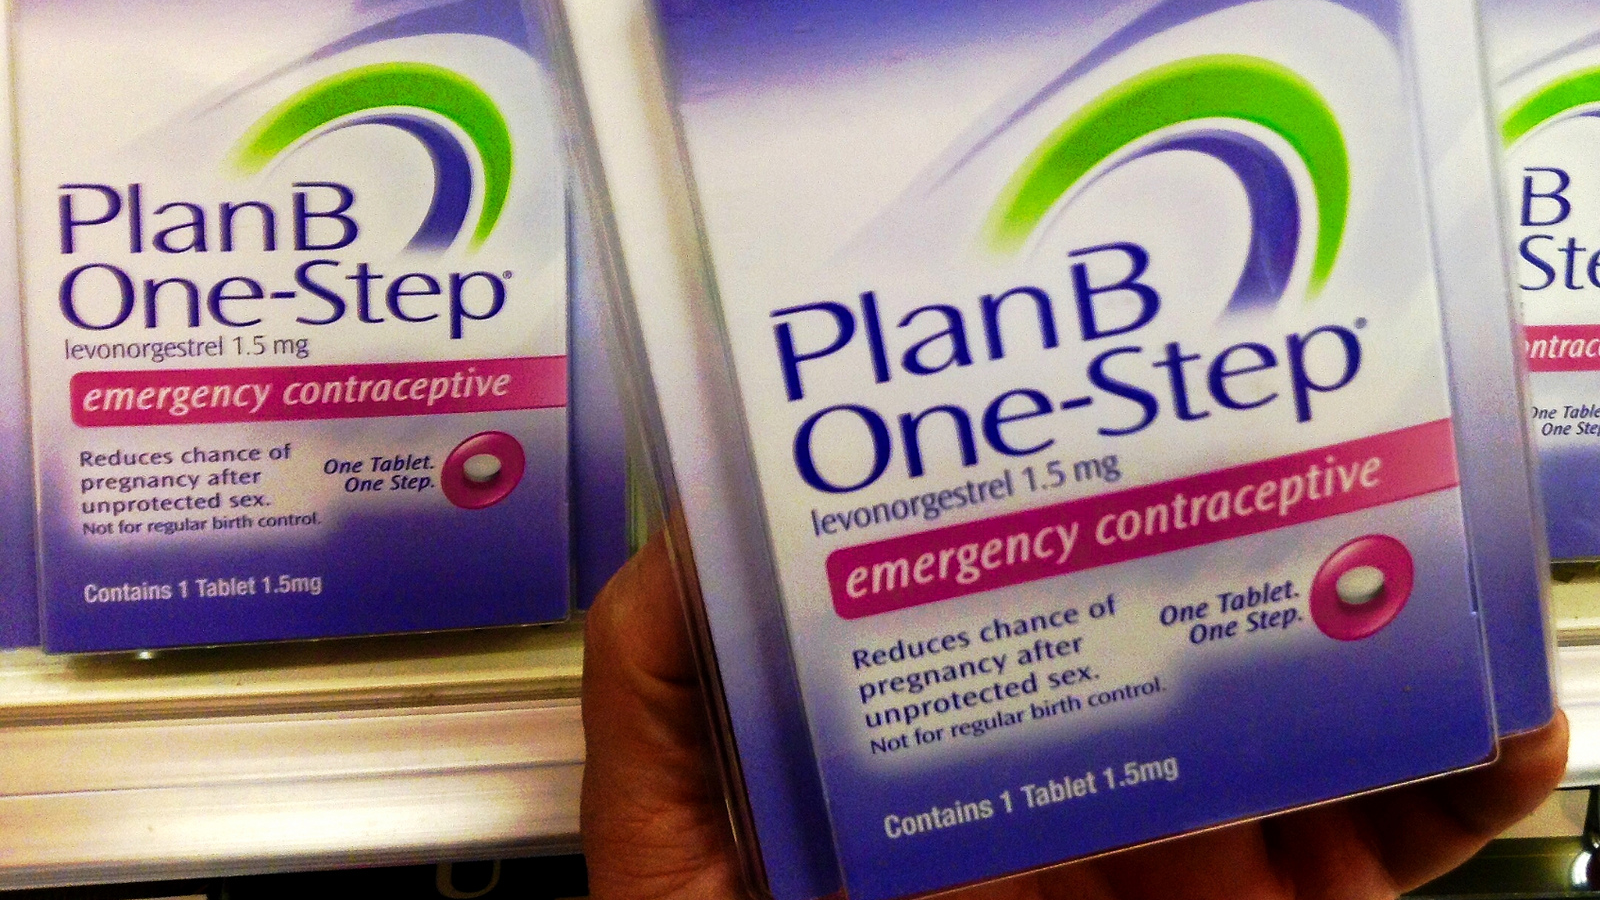 A Basic Guide To Your Emergency Contraception Options